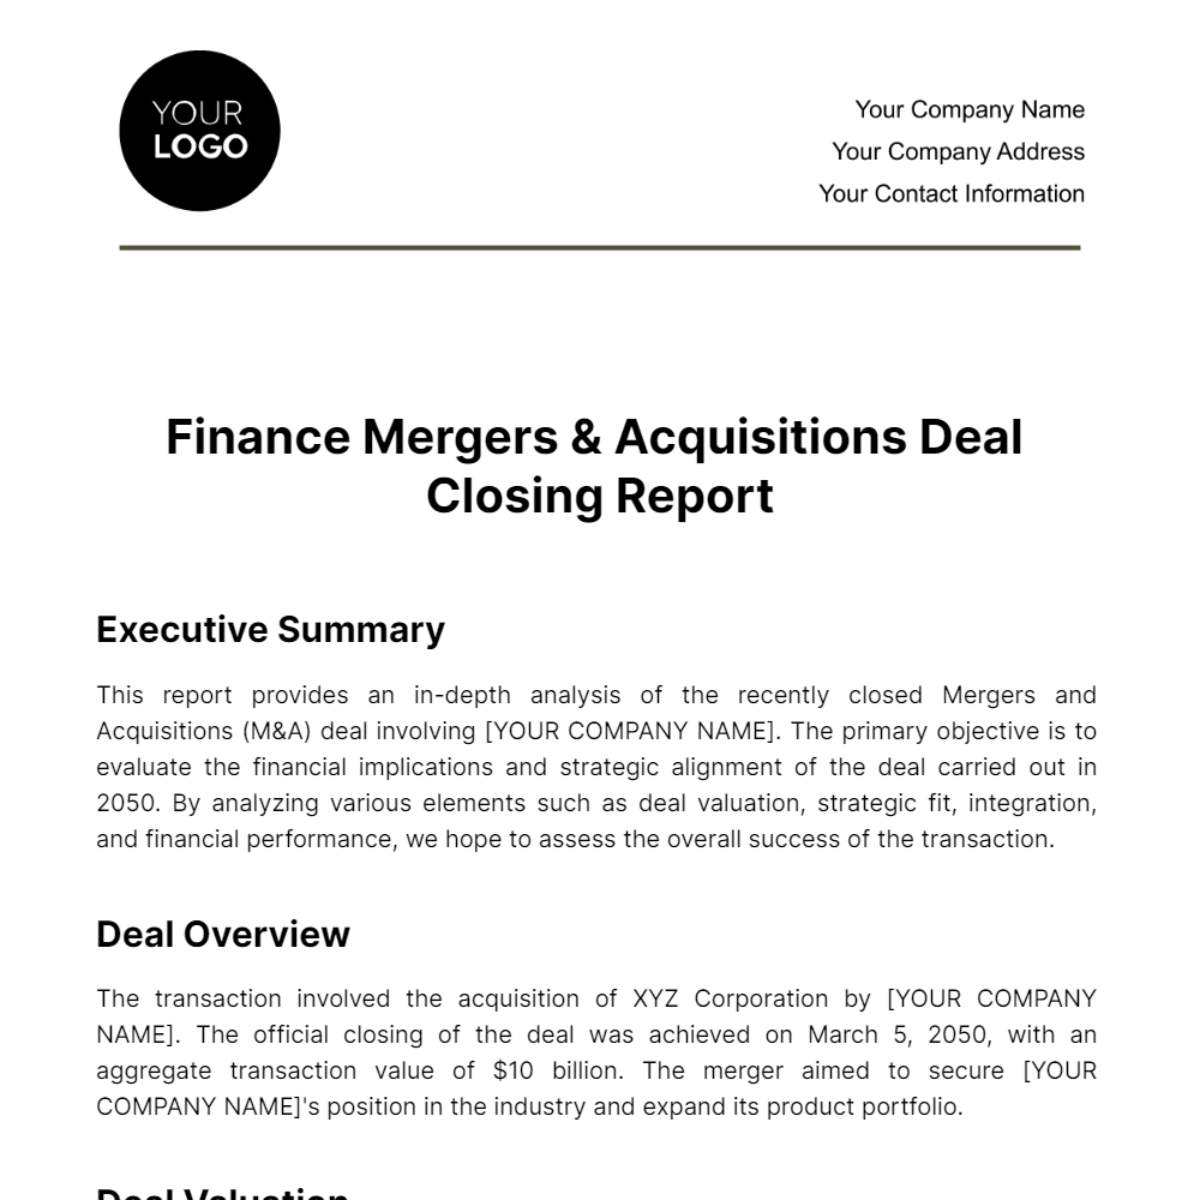 Finance Mergers & Acquisitions Deal Closing Report Template